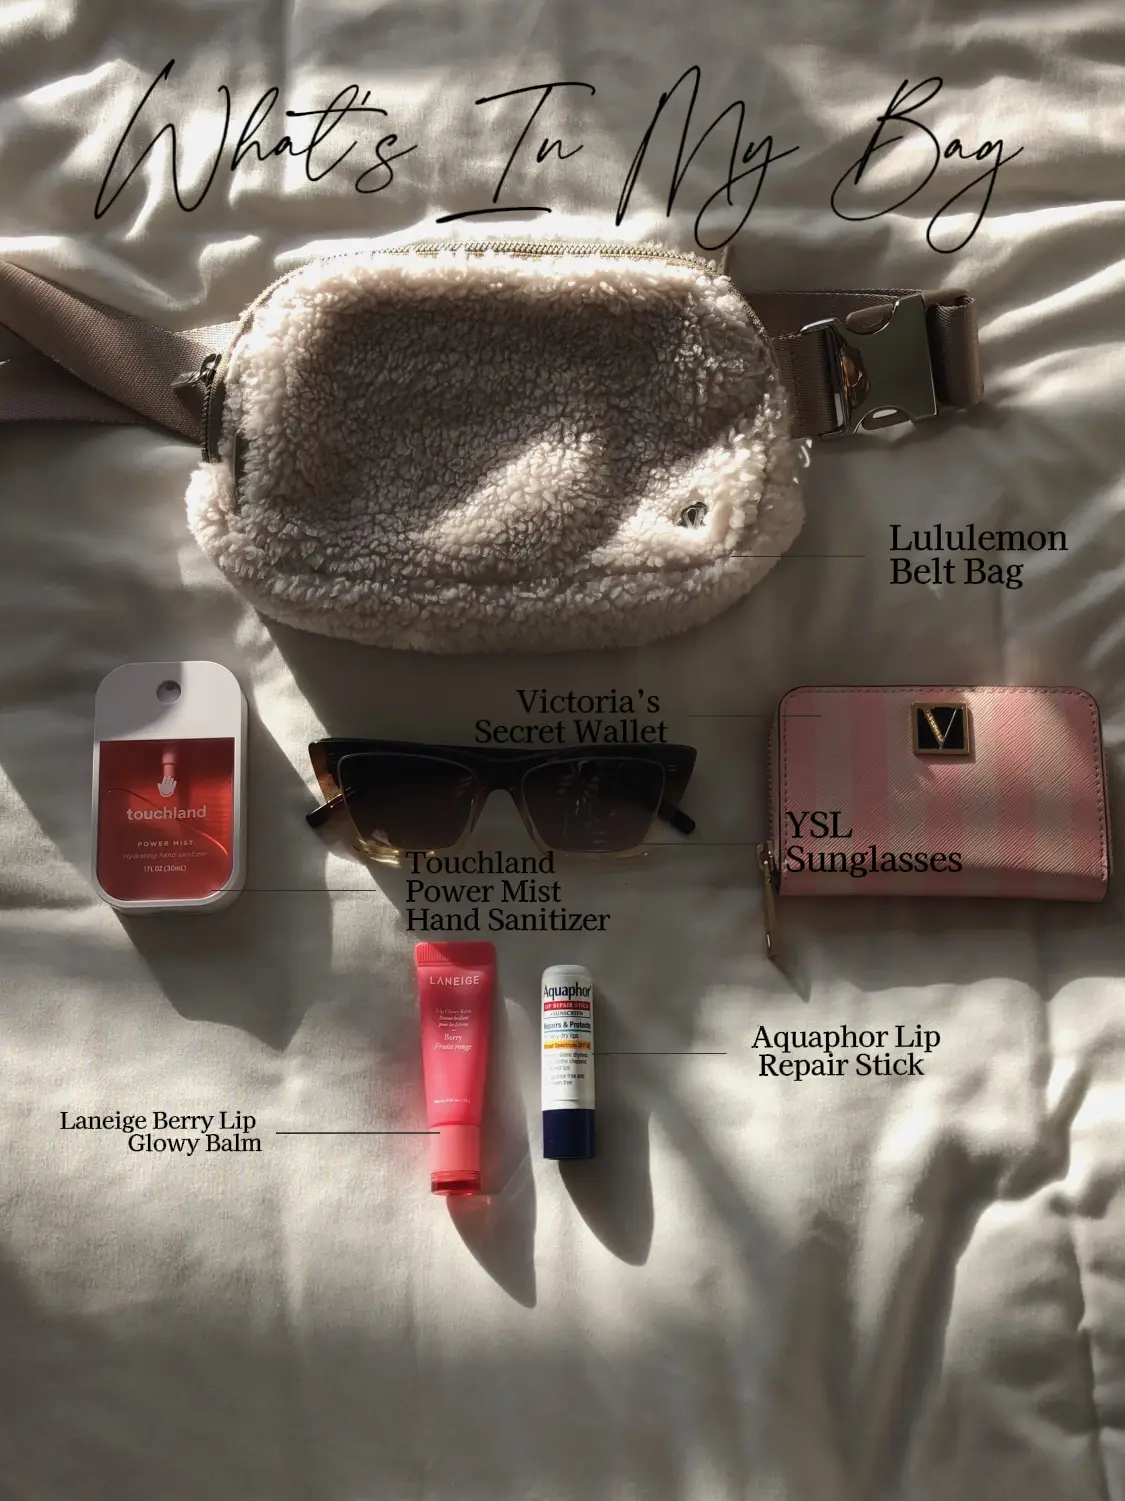 My first CLN Bag, Unbox with me: absolutely obsessed with my college b